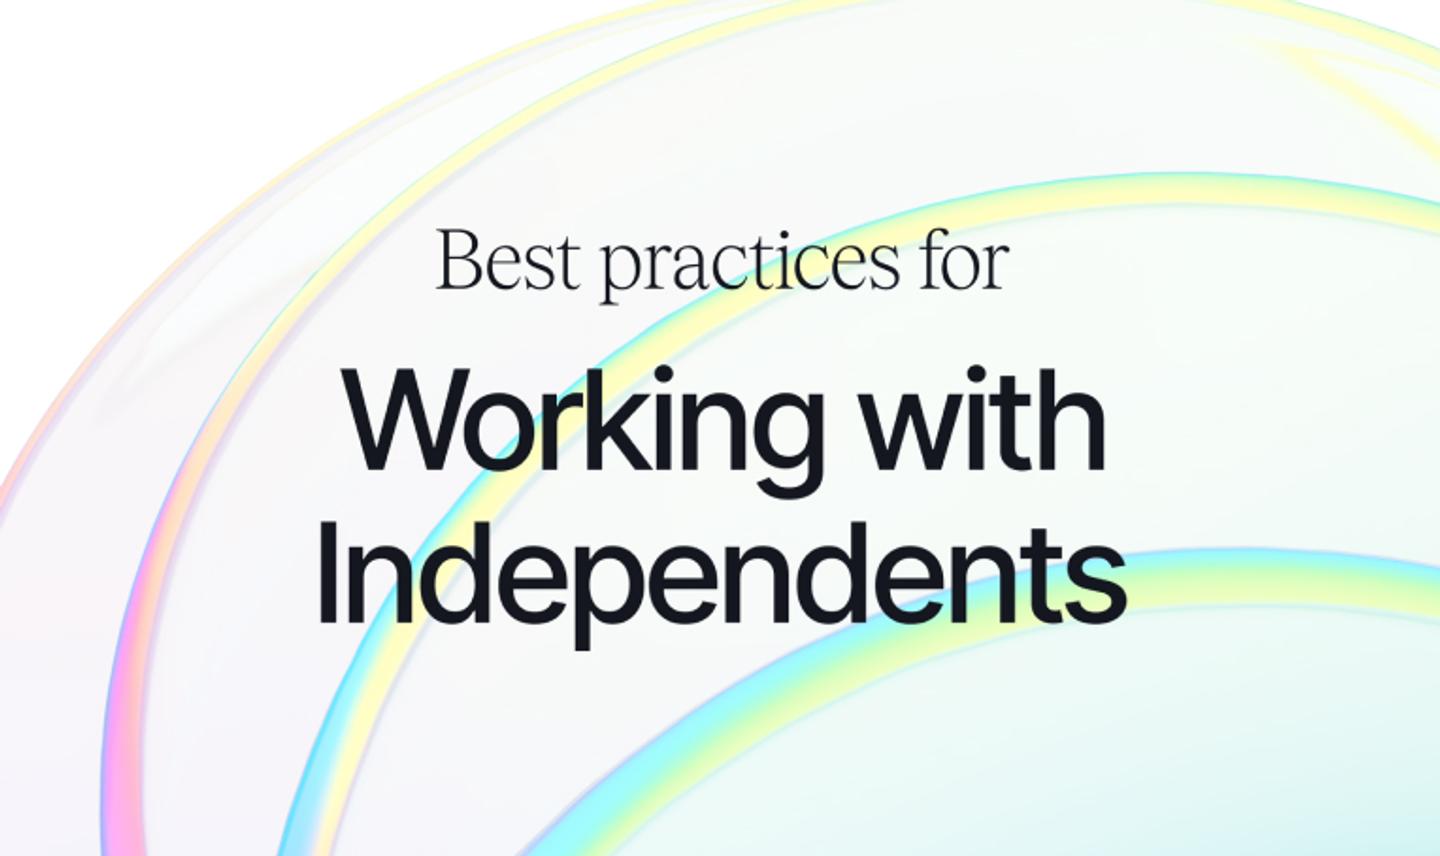 Working with Independents